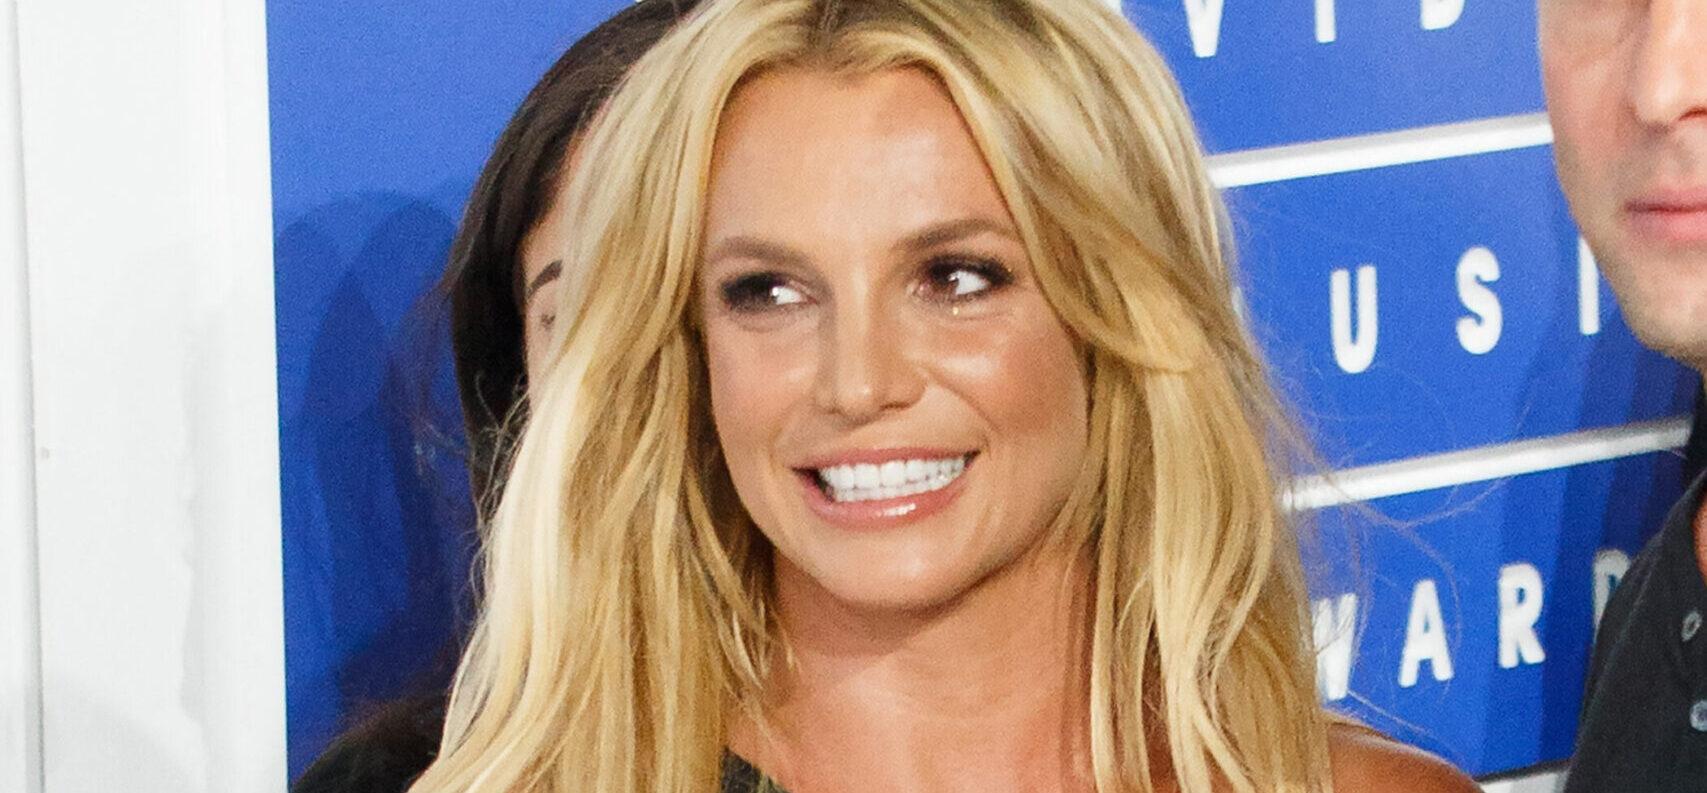 Britney Spears Claims She Made Out With Ben Affleck ‘Years Ago’